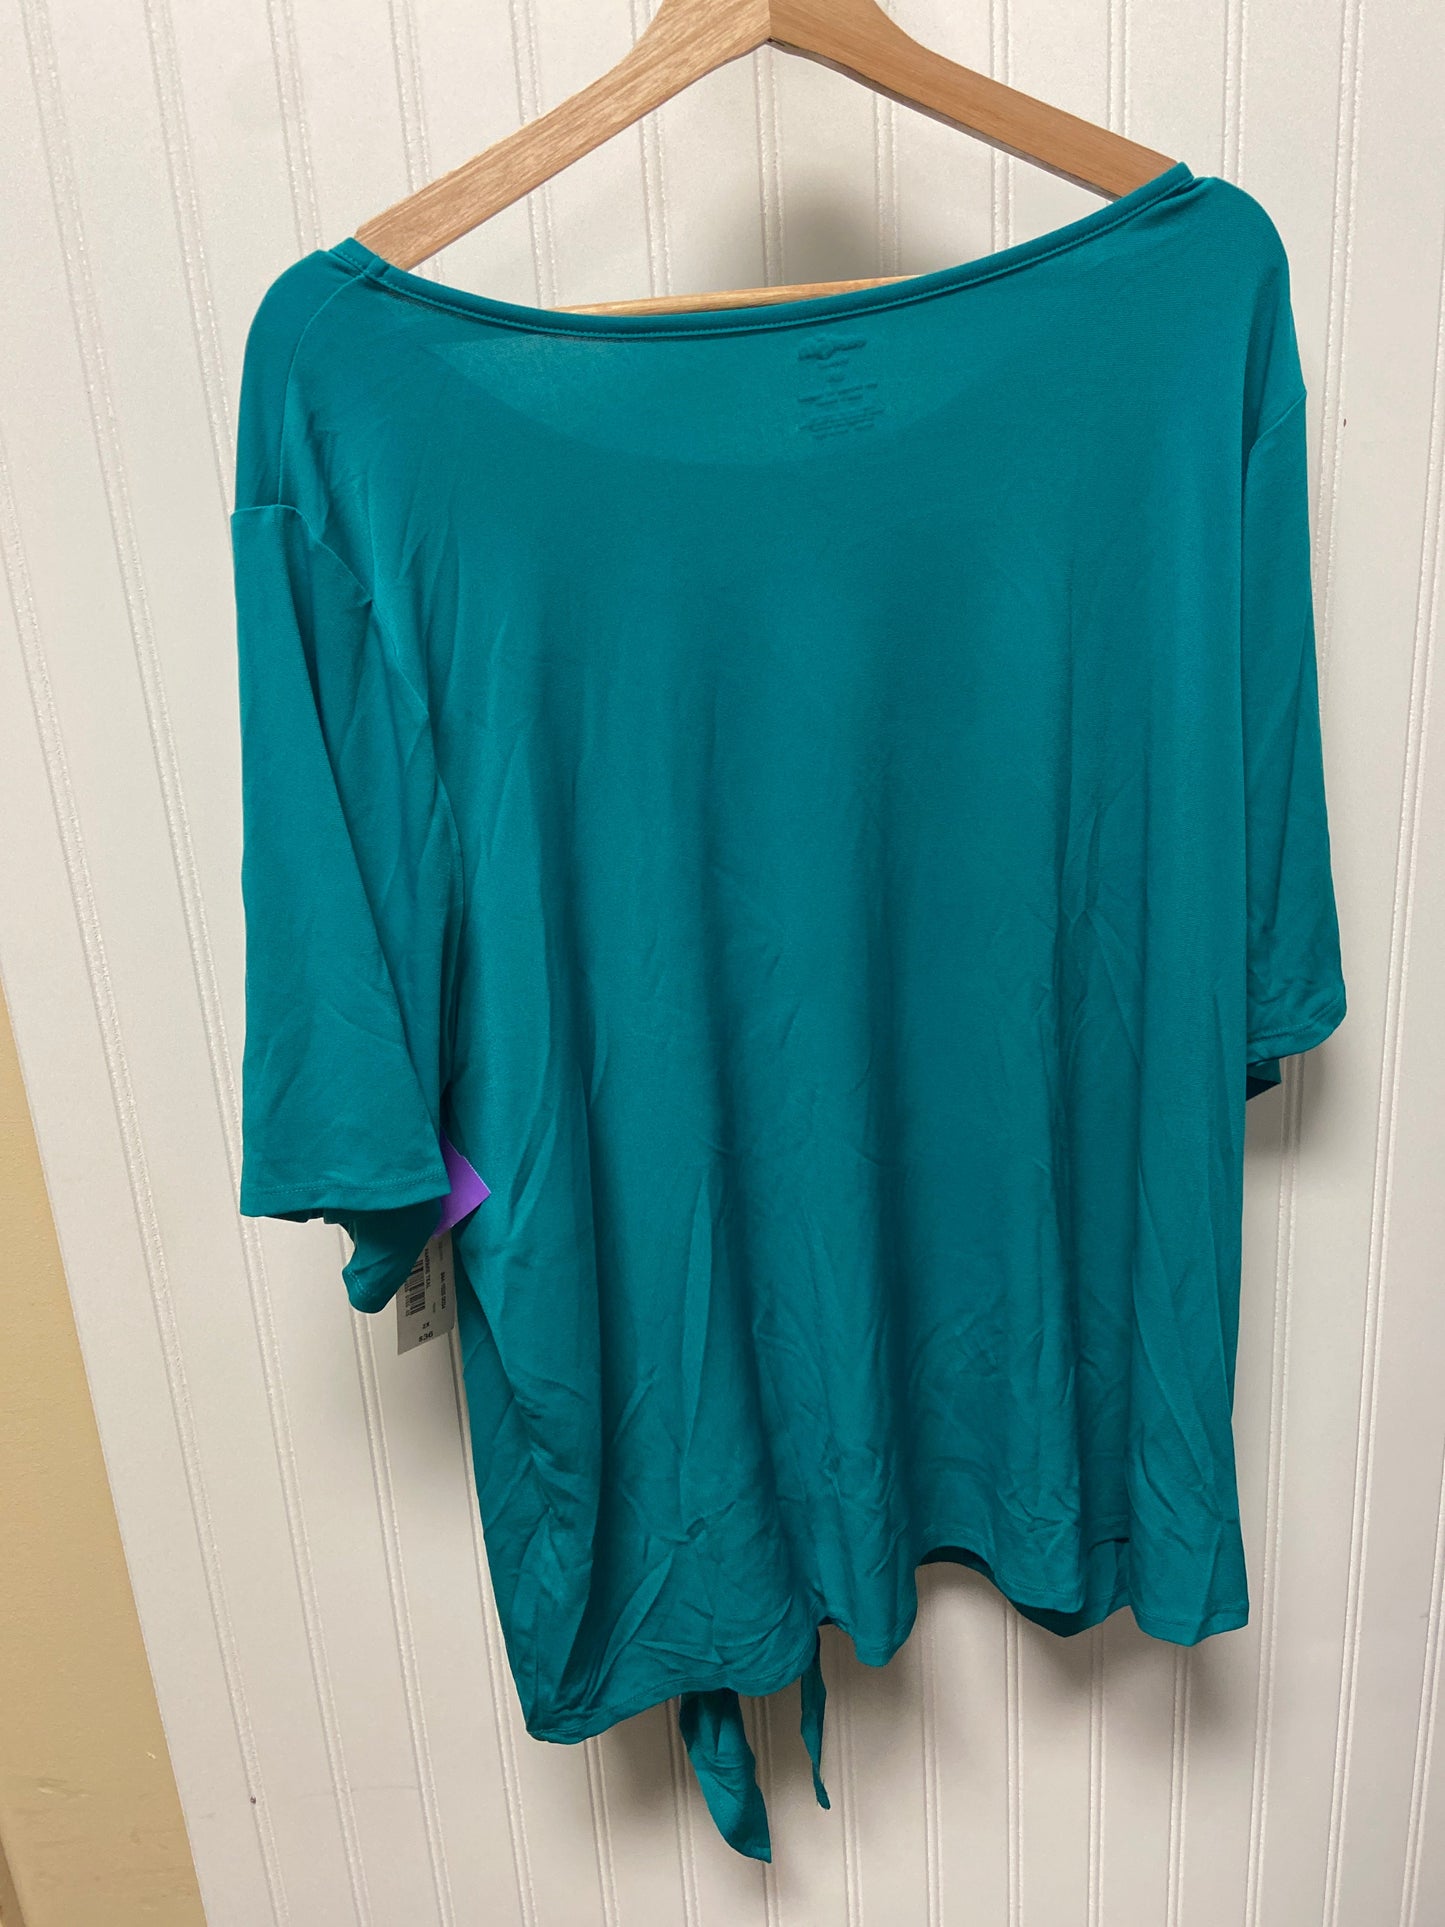 Teal Top Short Sleeve East 5th, Size 2x